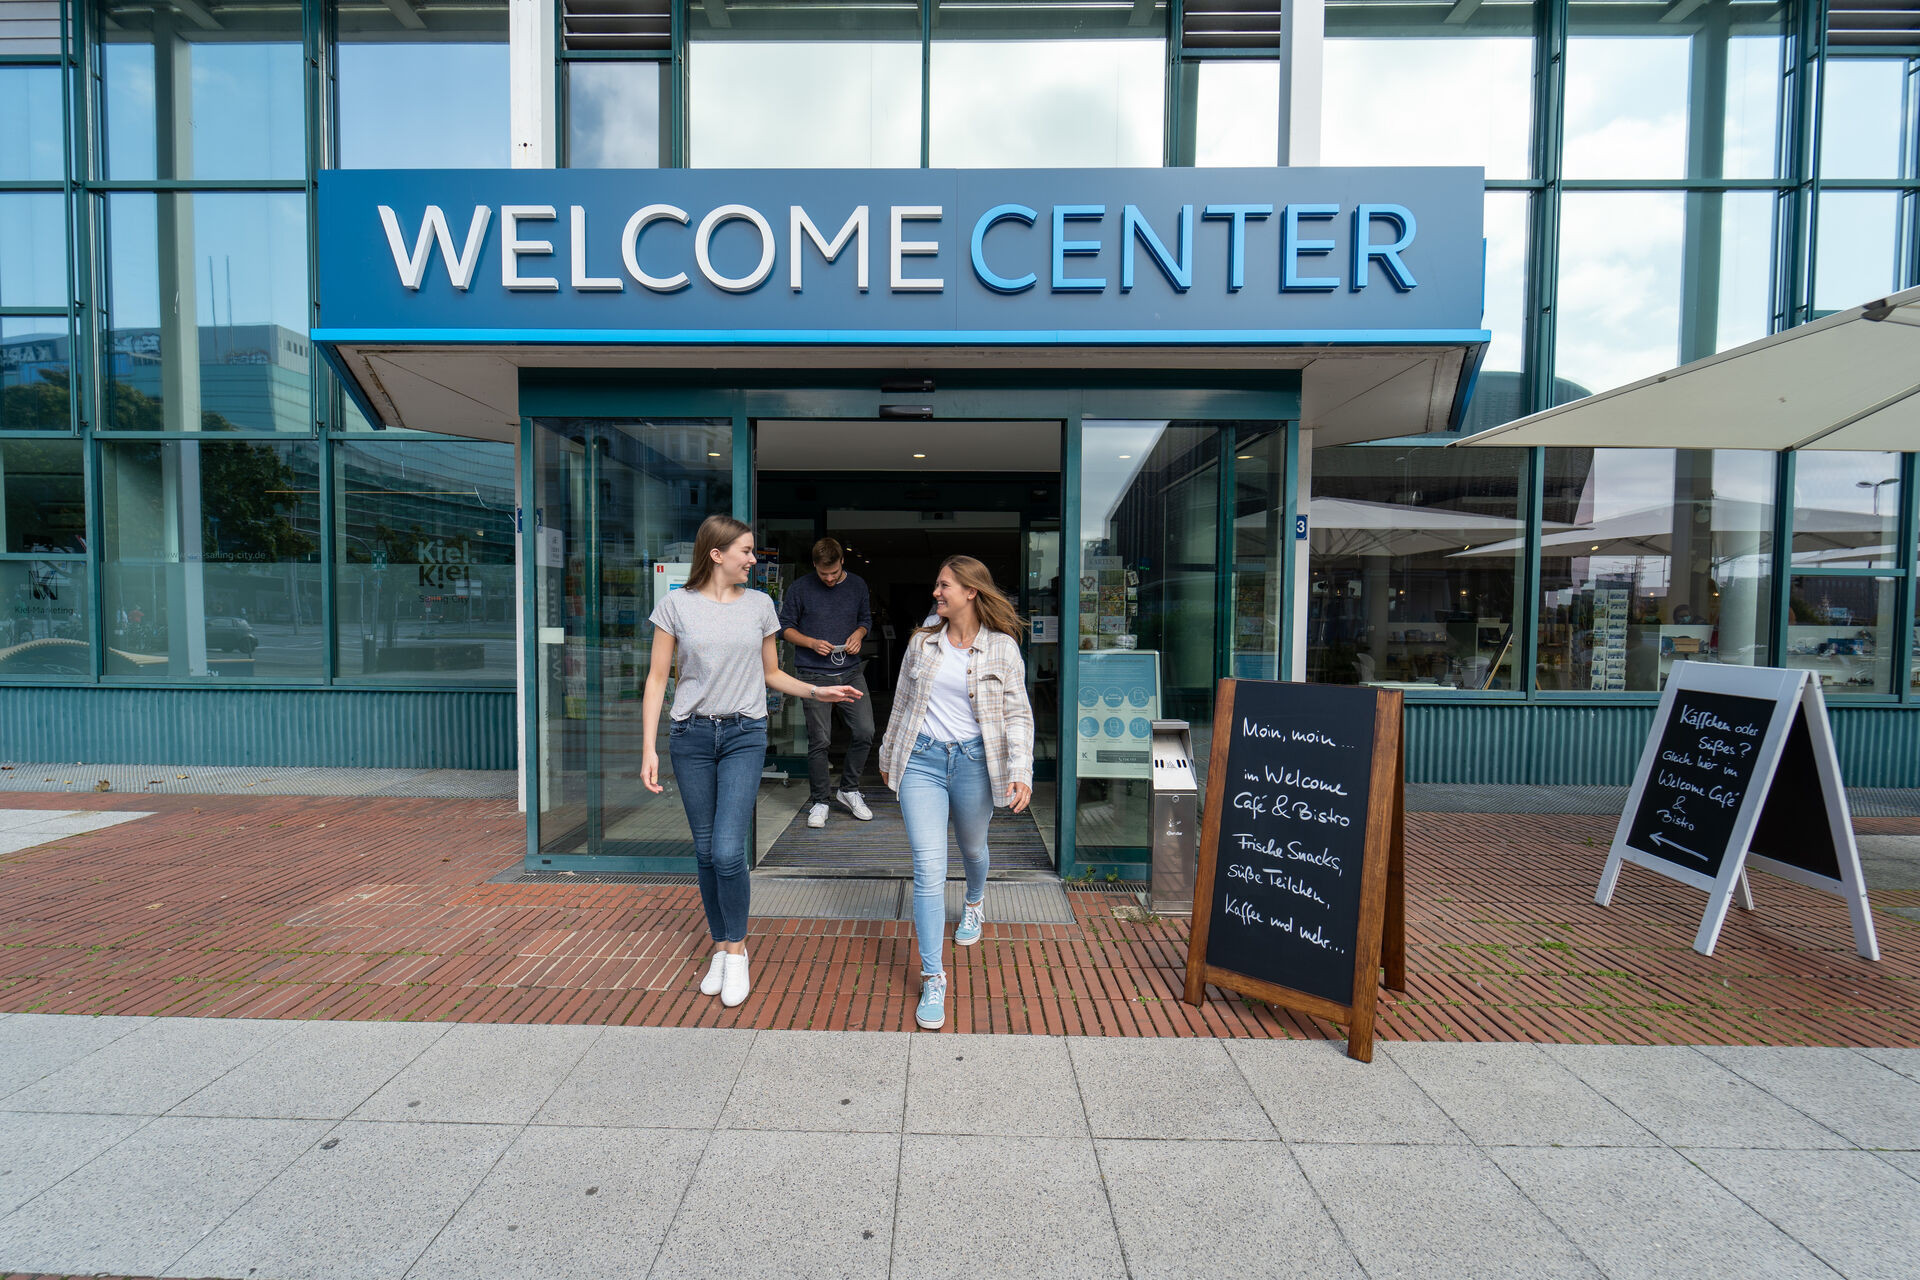  Do you still have questions about Kiel, the tourist attractions or sightseeing spots? Then visit our Welcome Center!